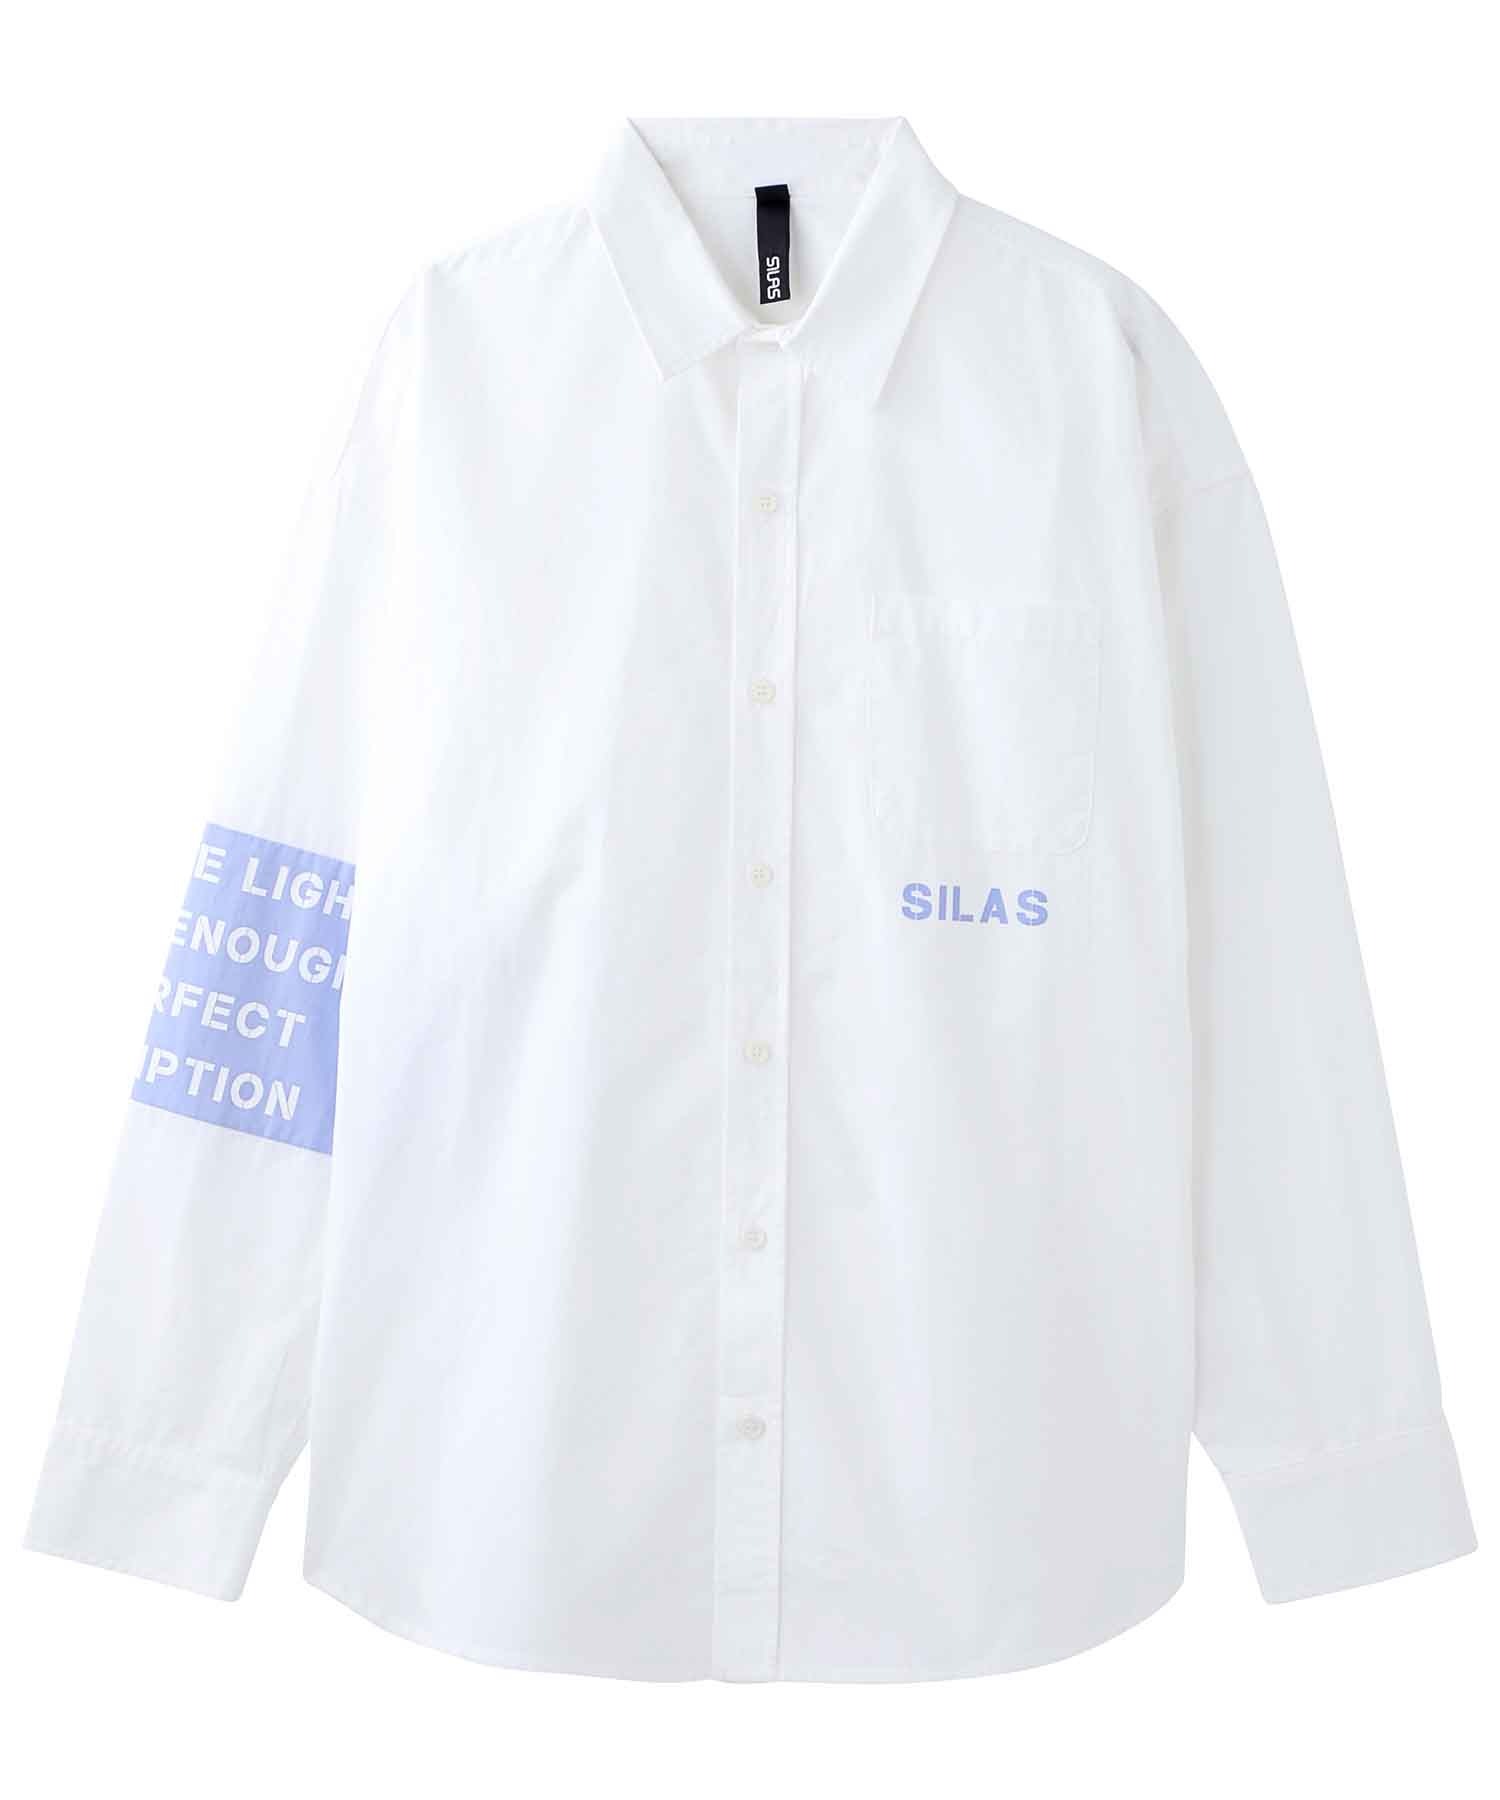 SILASCONTRAST SLEEVE 本物新品保証 LS SHIRT 堅実な究極の コントラスト サイラス シャツ スリーブ